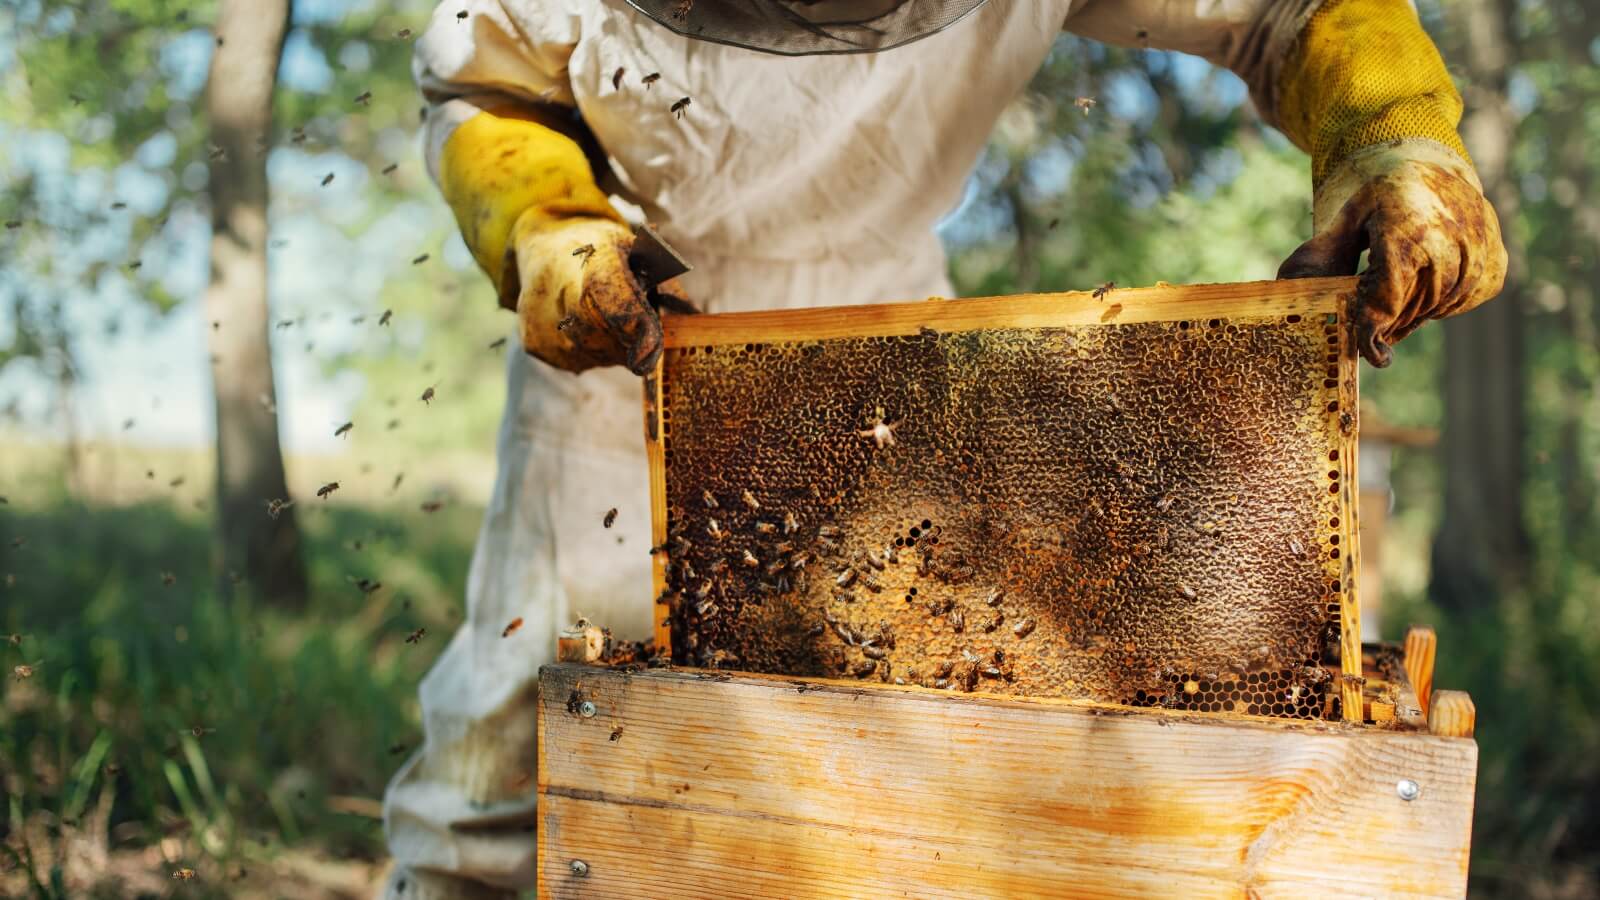 A beekeeper lifts a beehive out of a wooden box, as bees fly around the honeycomb and honey